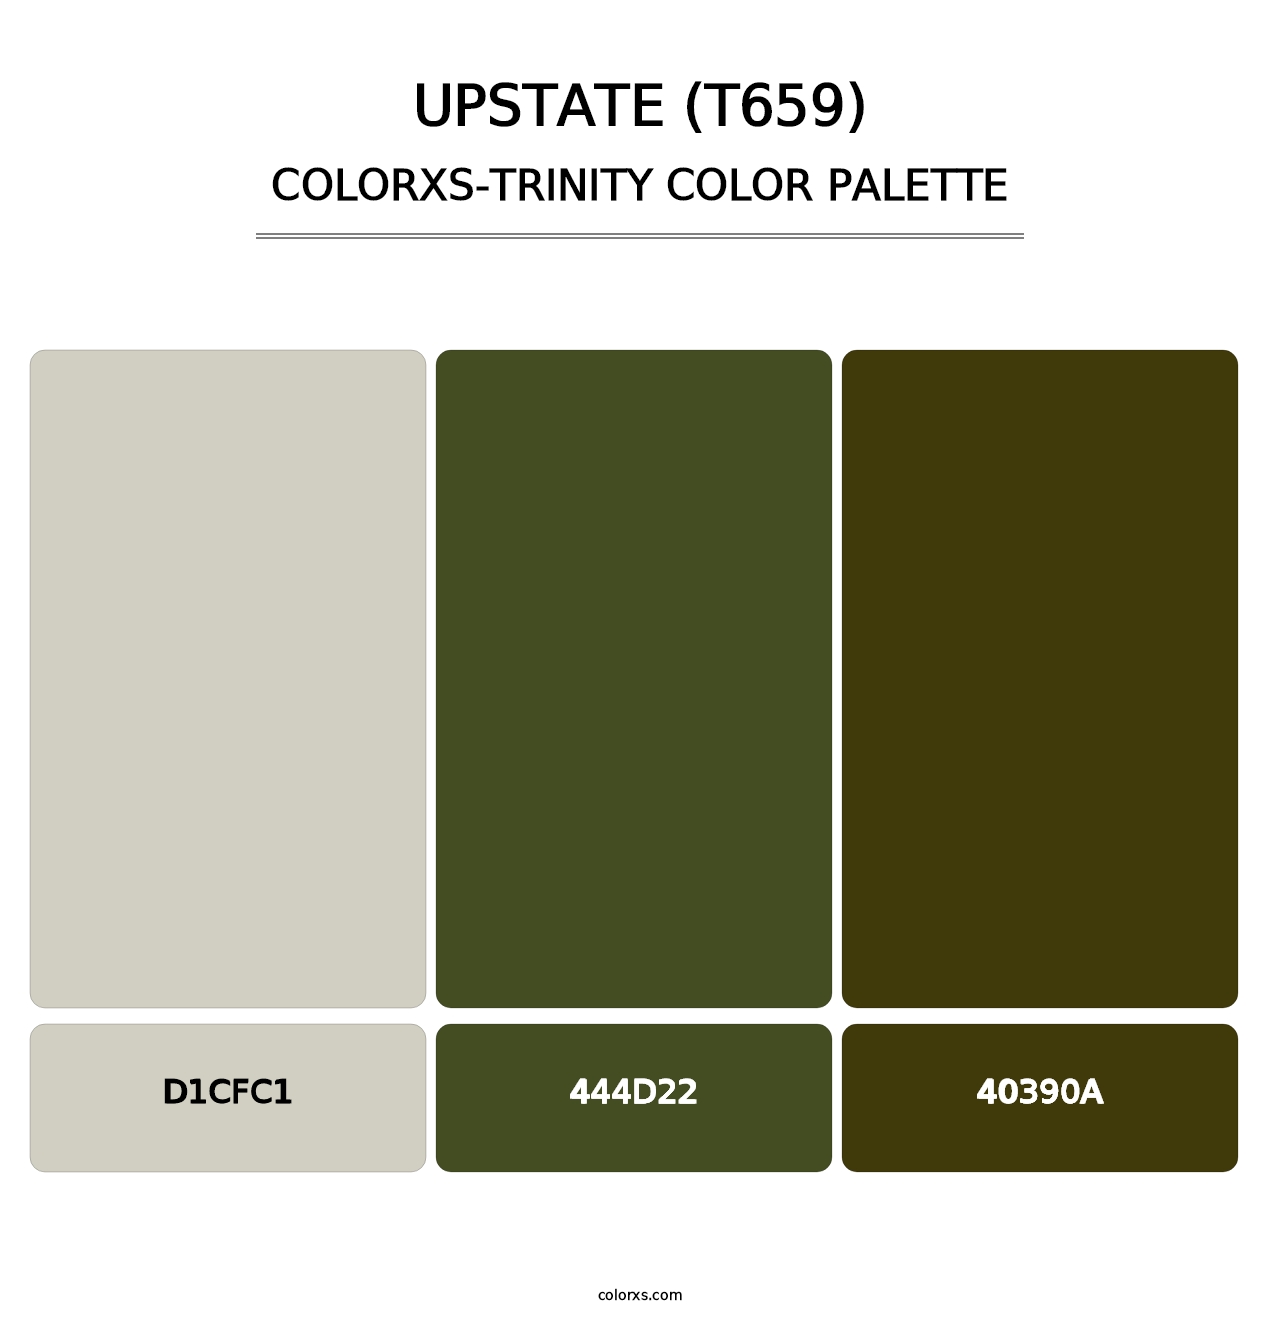 Upstate (T659) - Colorxs Trinity Palette